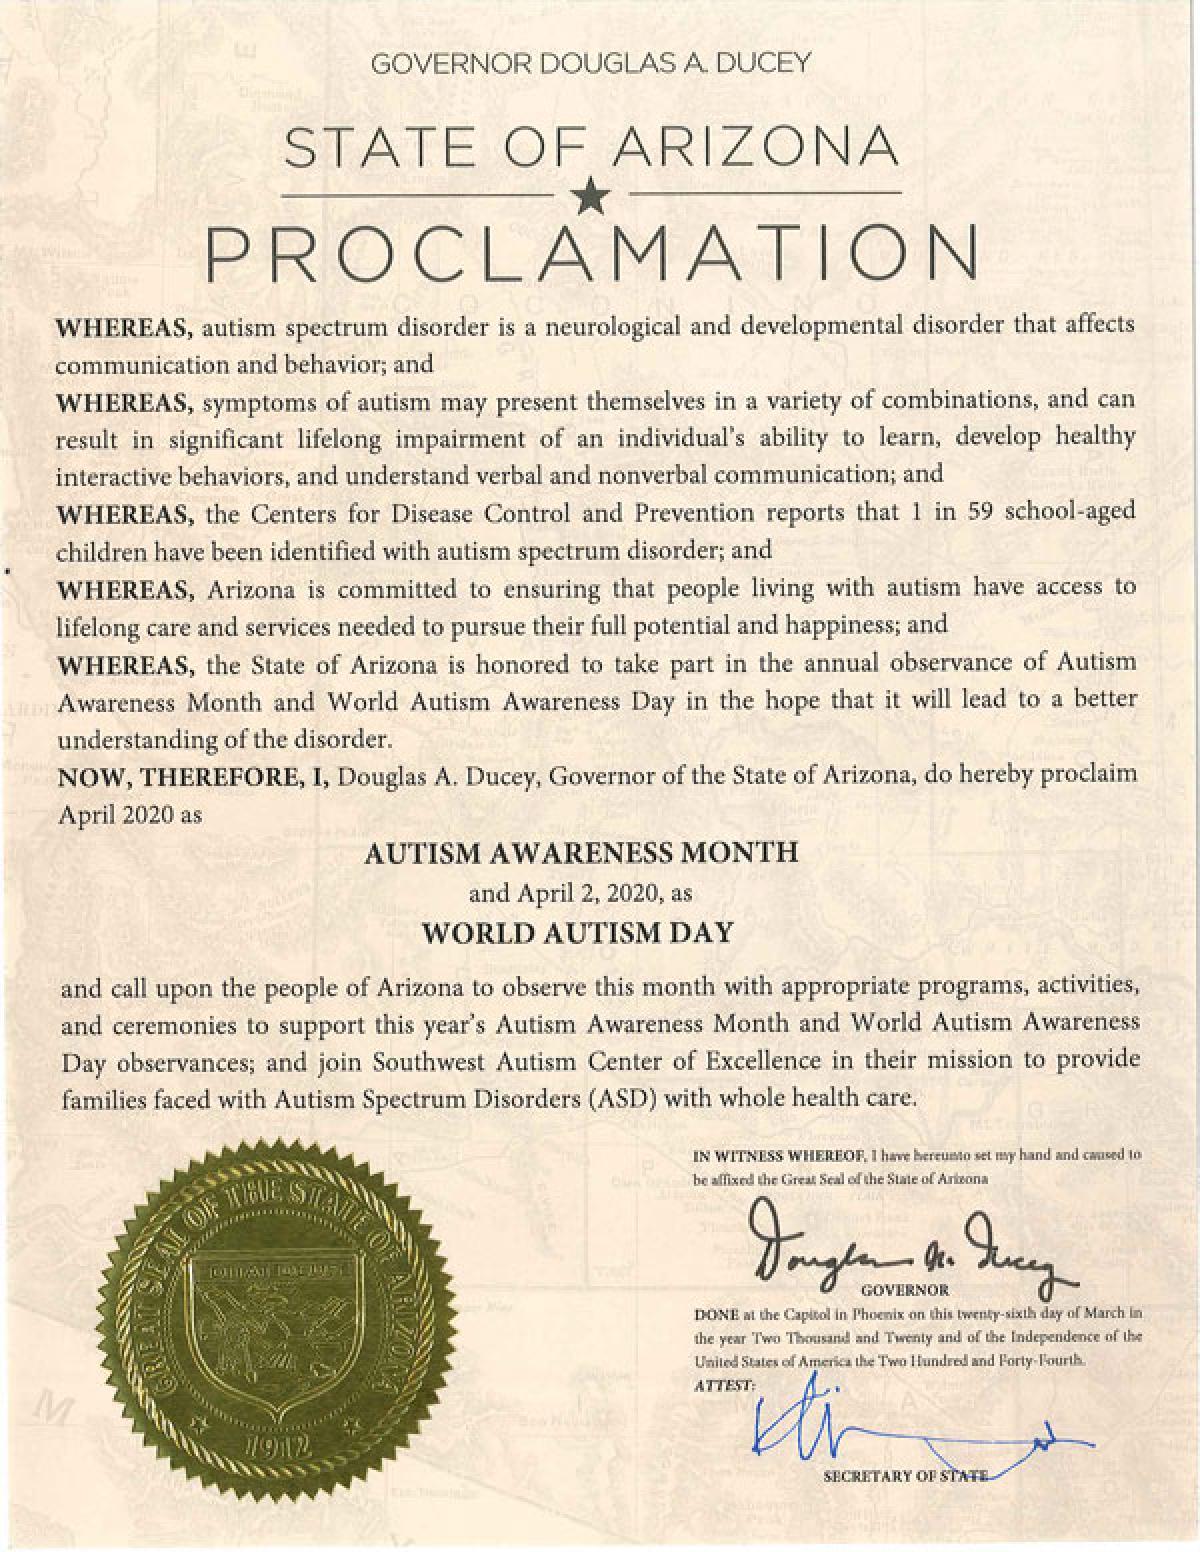 Autism Awareness Month and World Autism Day Proclamation - Governor Ducey